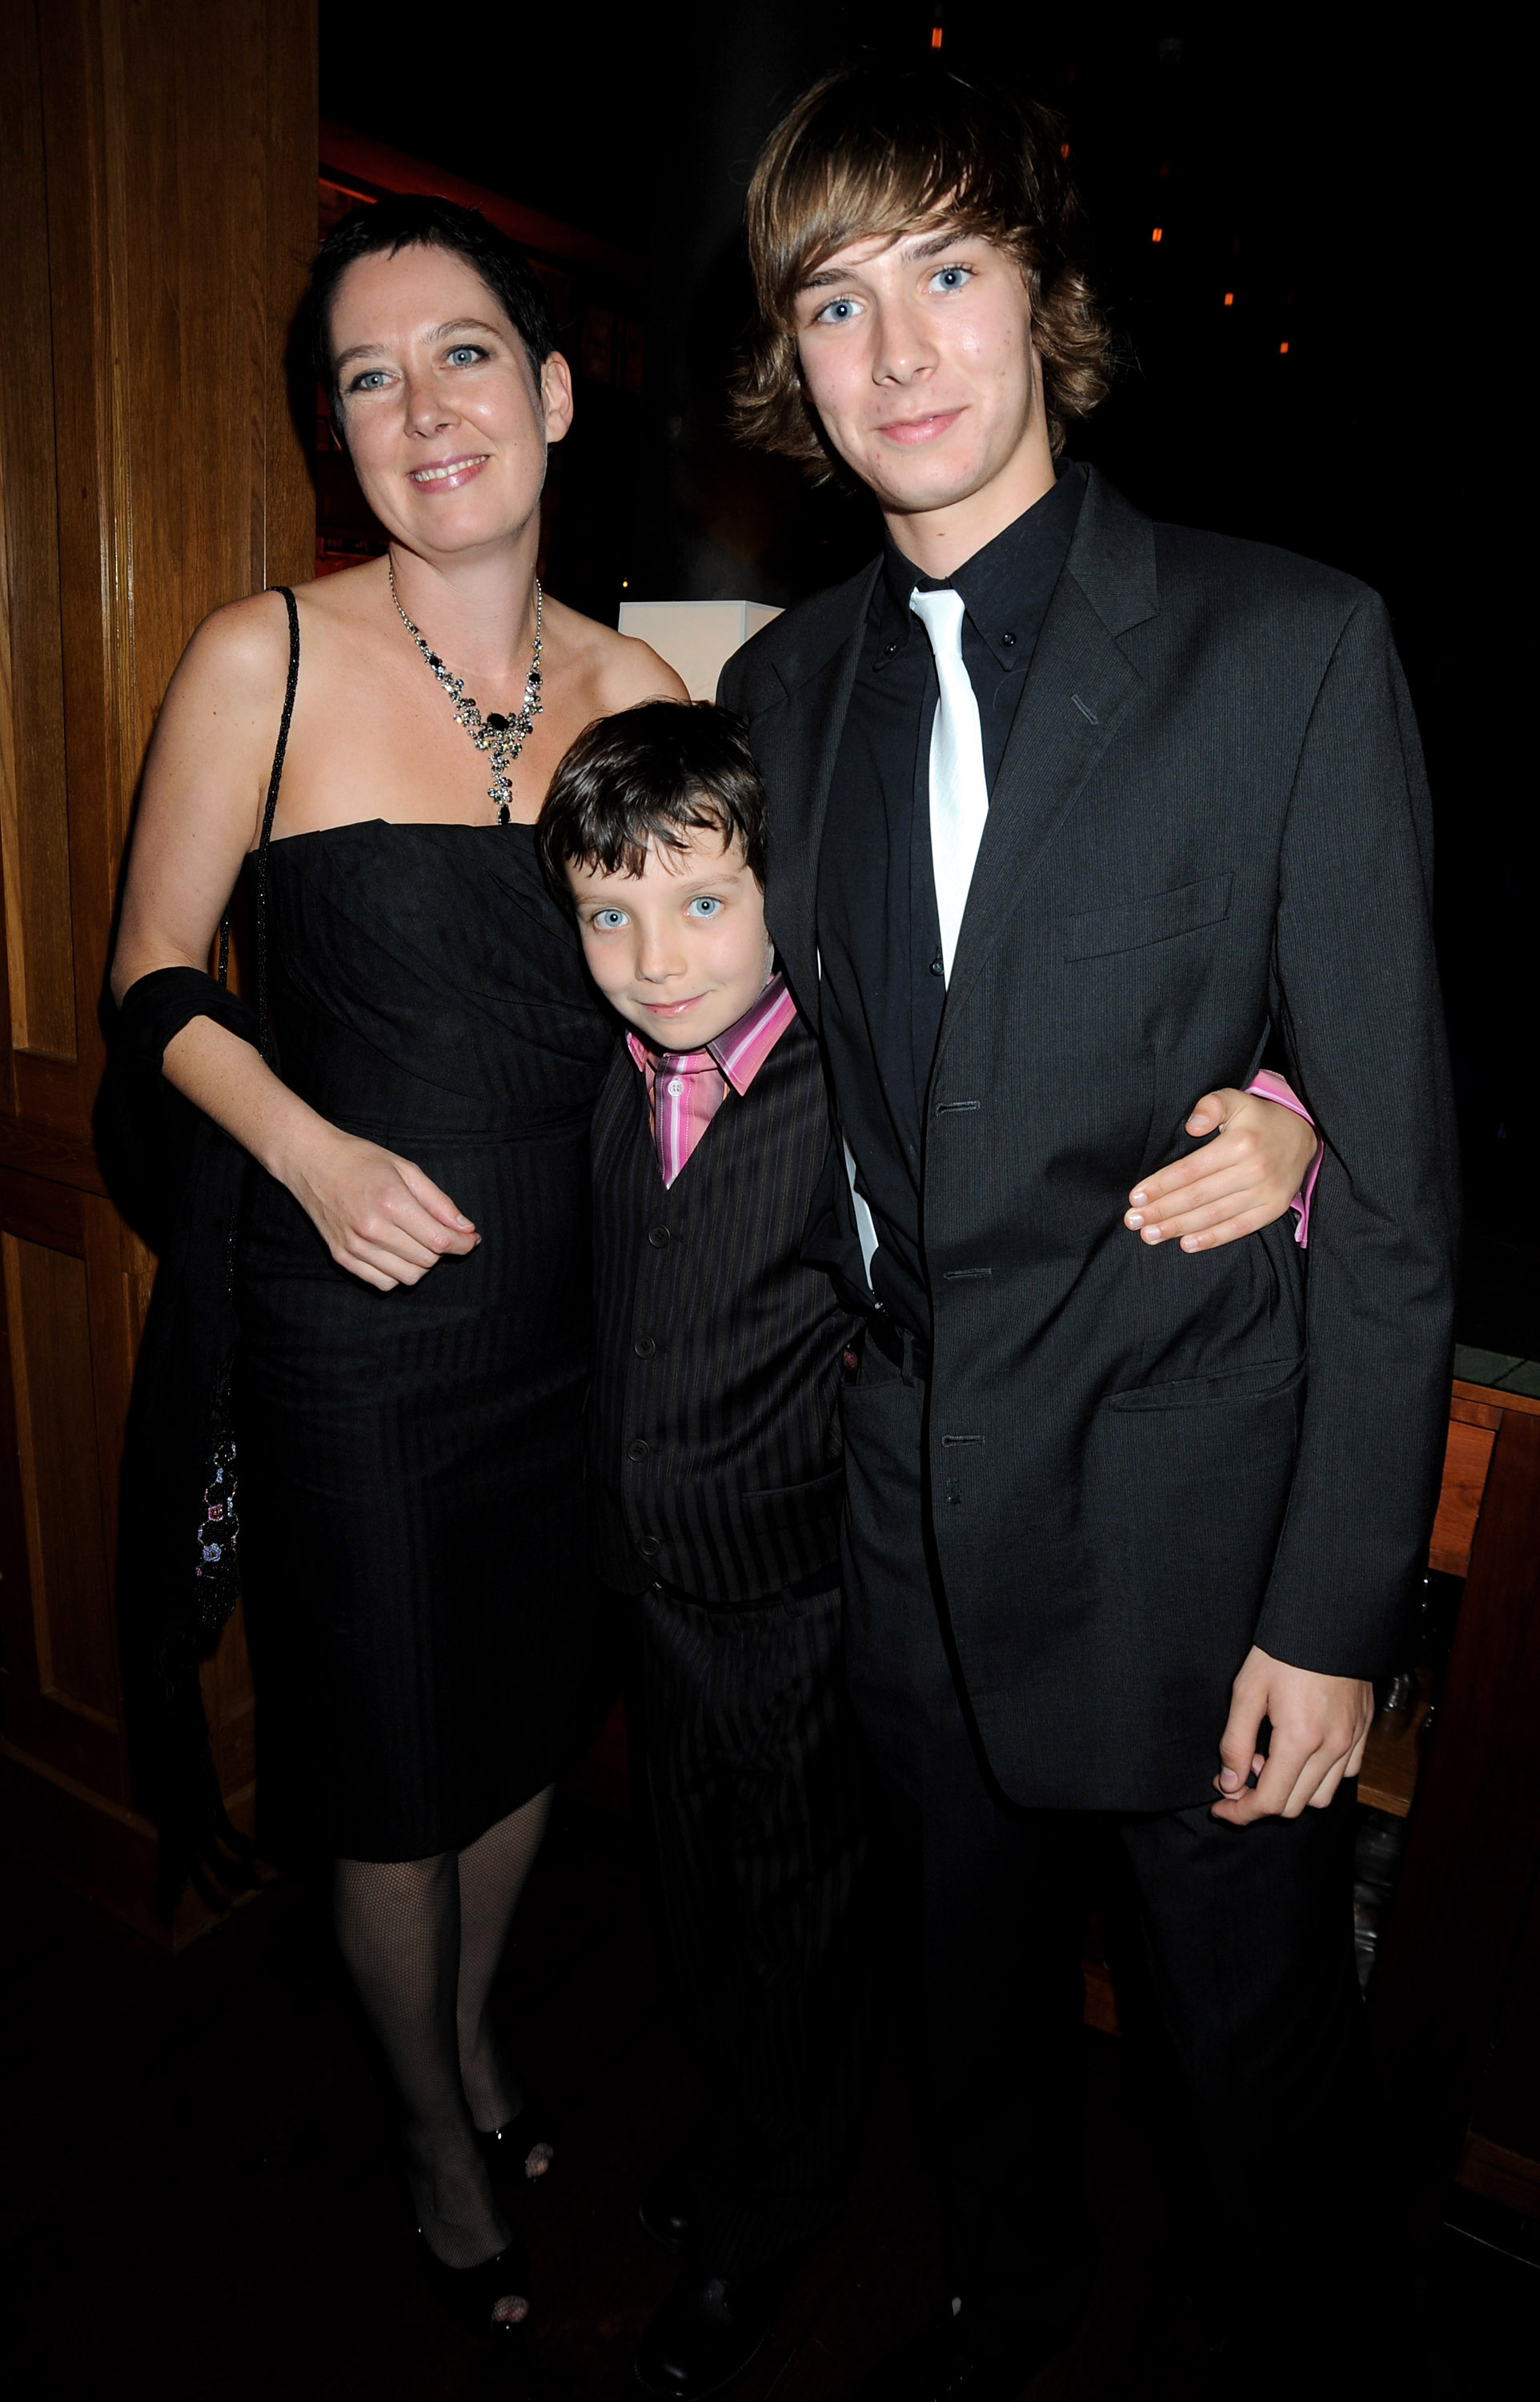 Asa Butterfield (C) with his mother, Jacqueline Farr, and his brother, Morgan, attend the pre-screening drinks reception for "The Boy In The Striped Pyjamas," at Automat September 11, 2008, in London, England. | Source: Getty Images